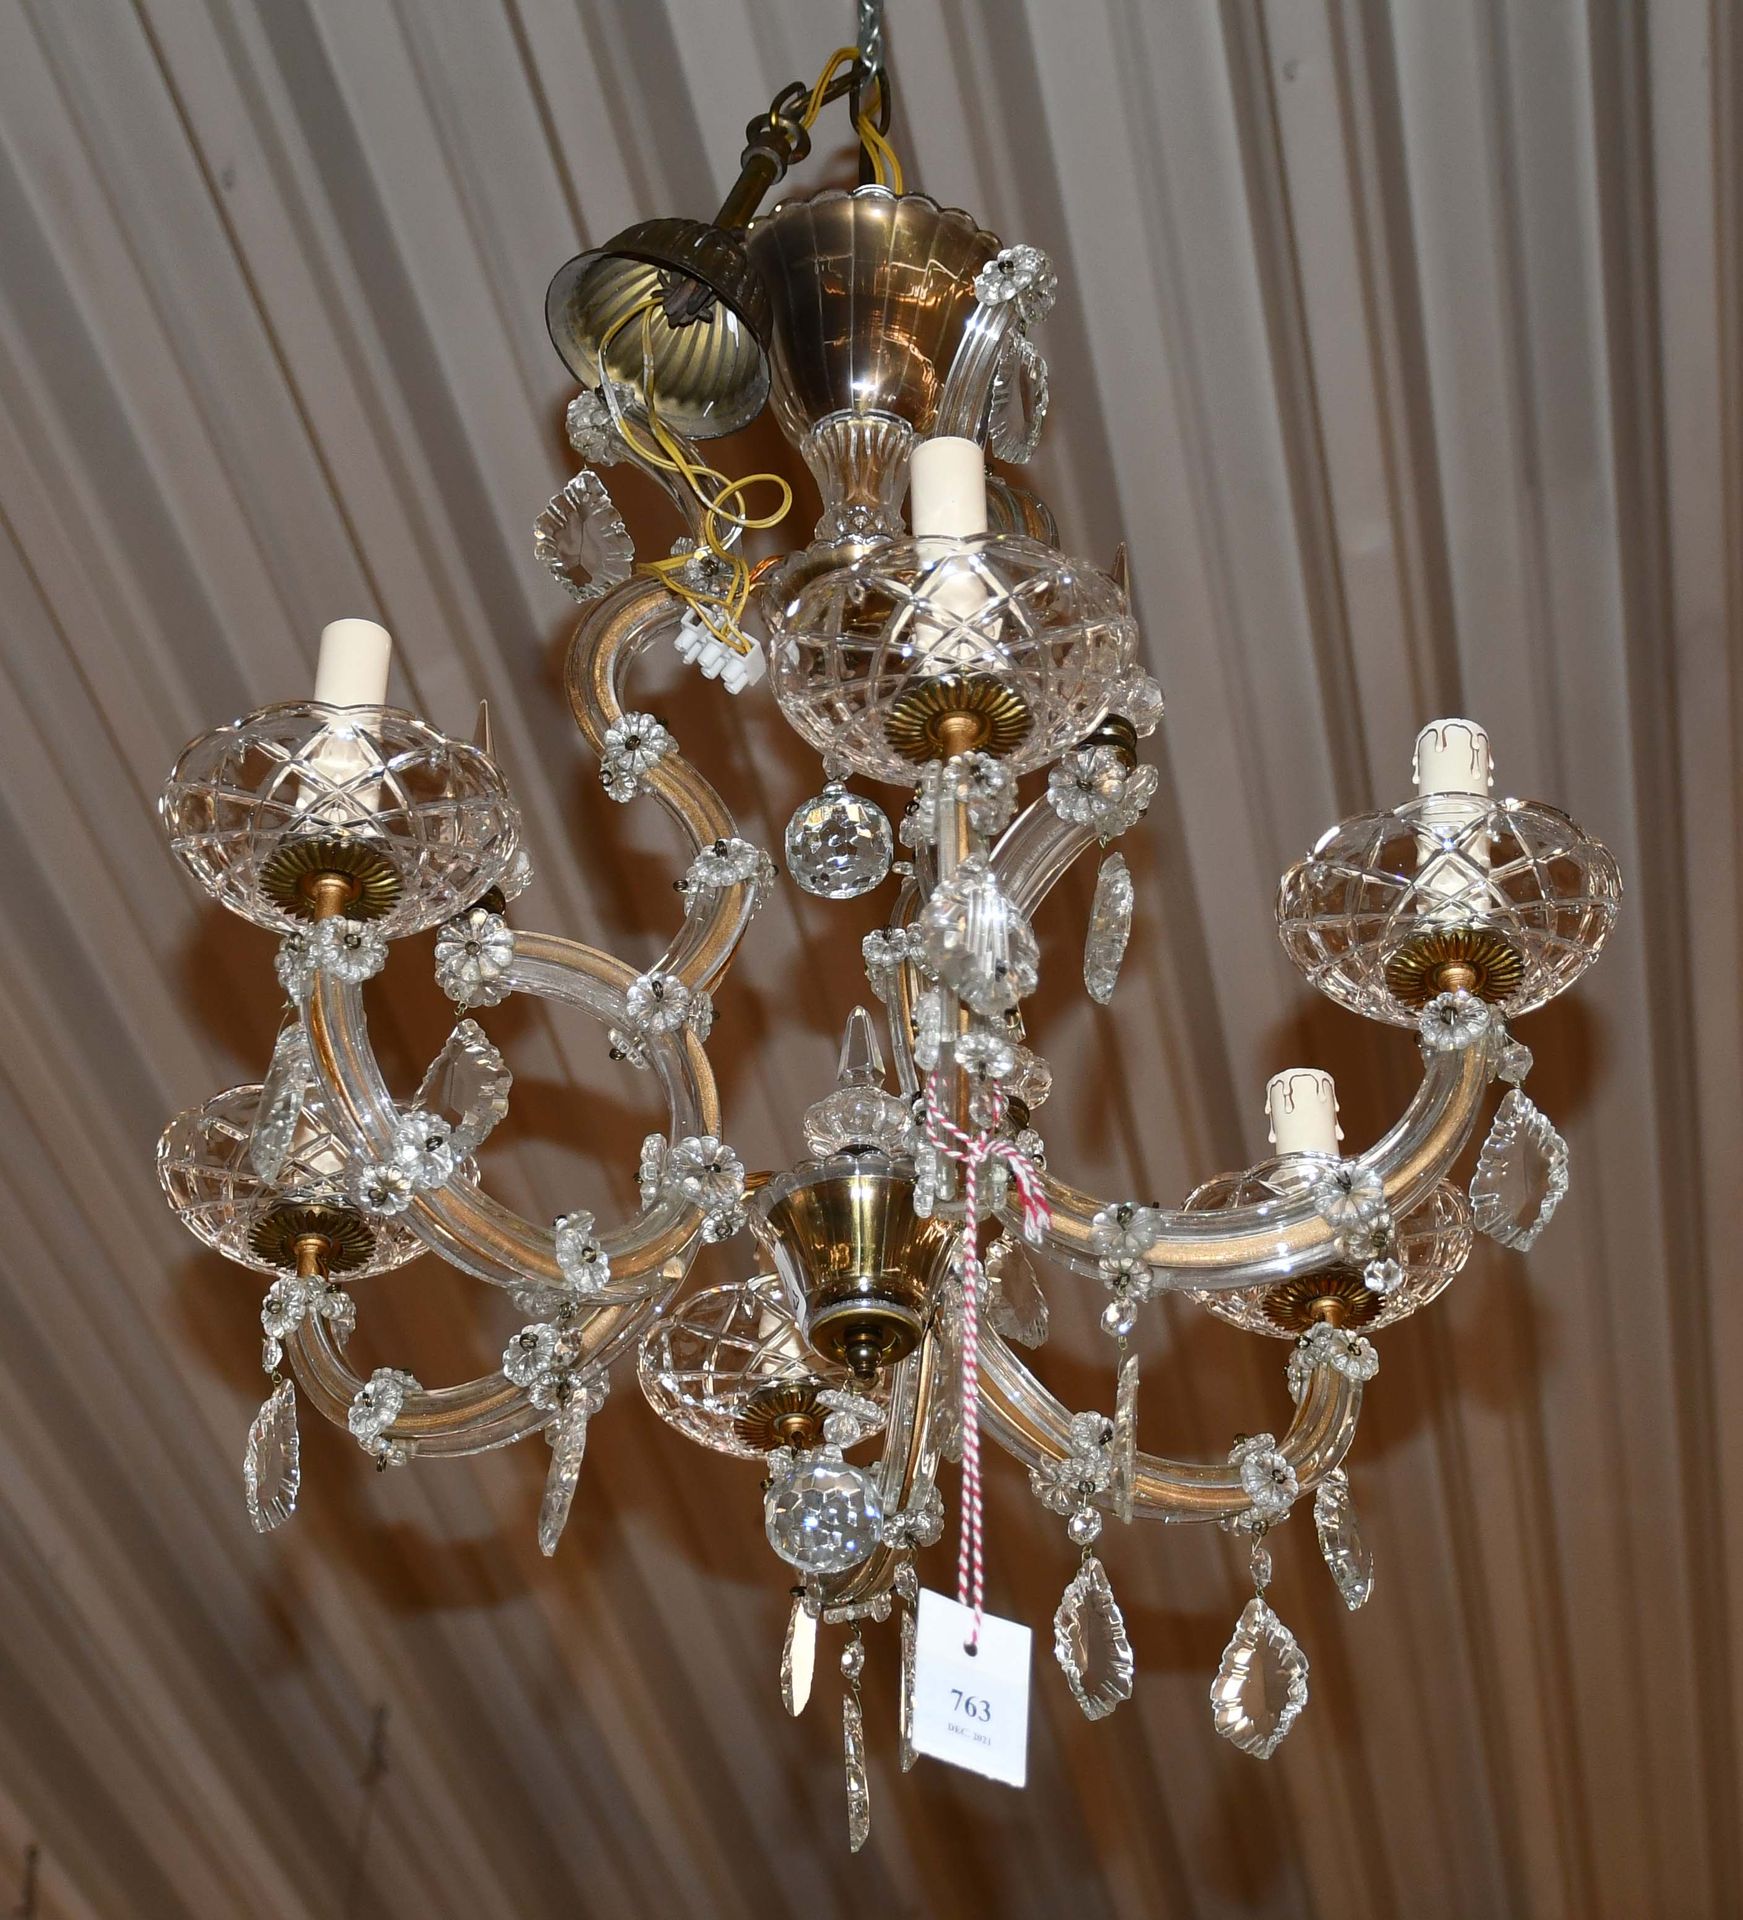 Null Marie-Thérèse chandelier with six arms of light and two sconces